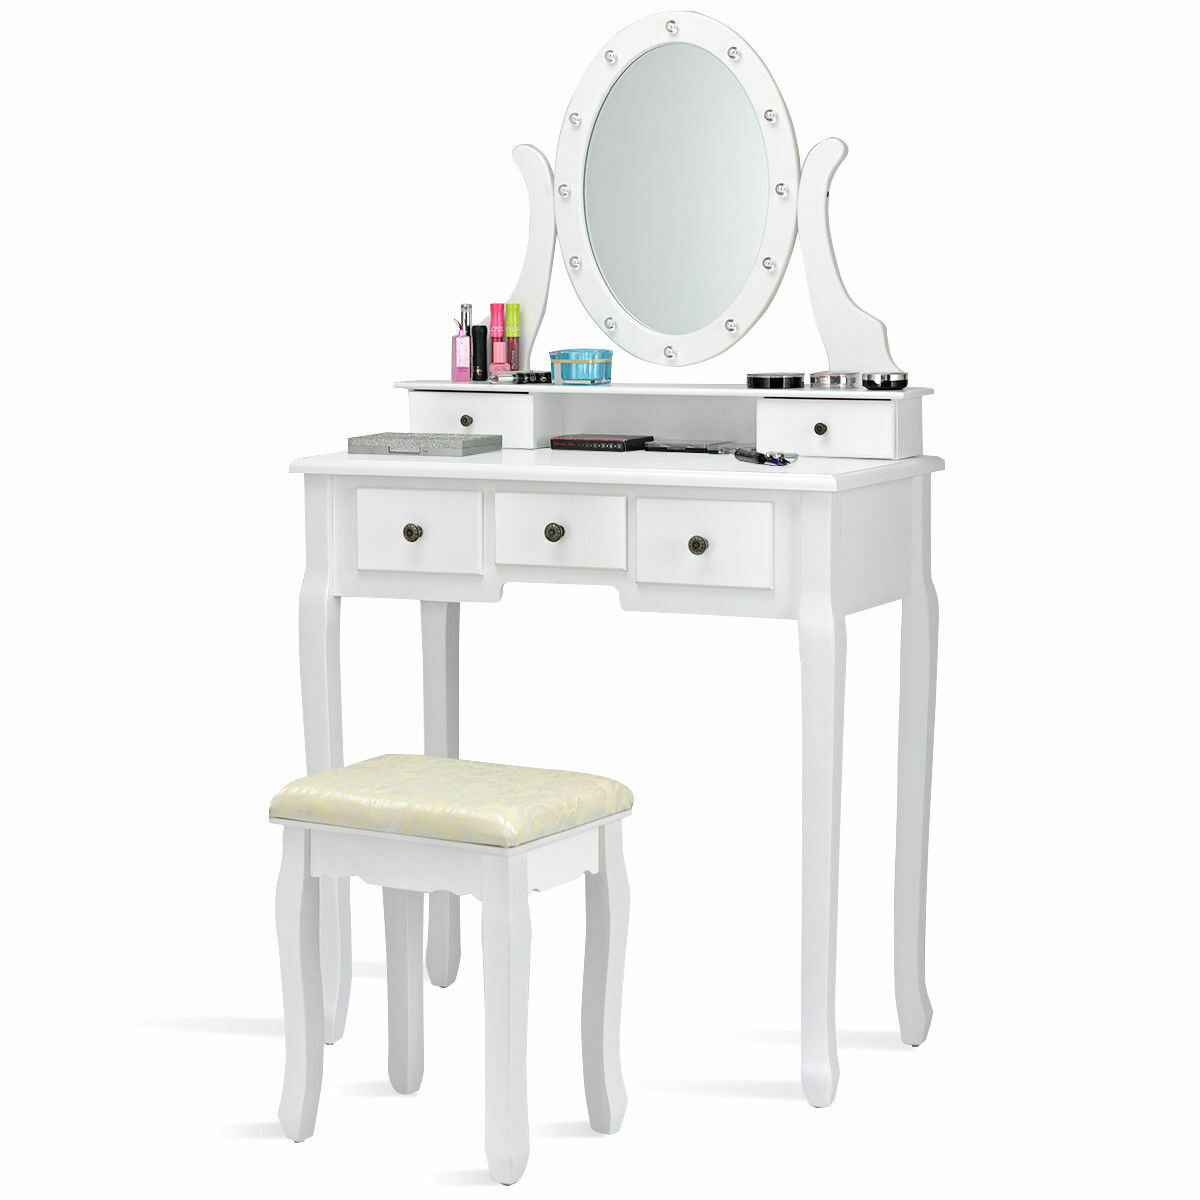 Generic 5 Drawers Vanity Makeup, Vanity Tables With Lighted Mirrors